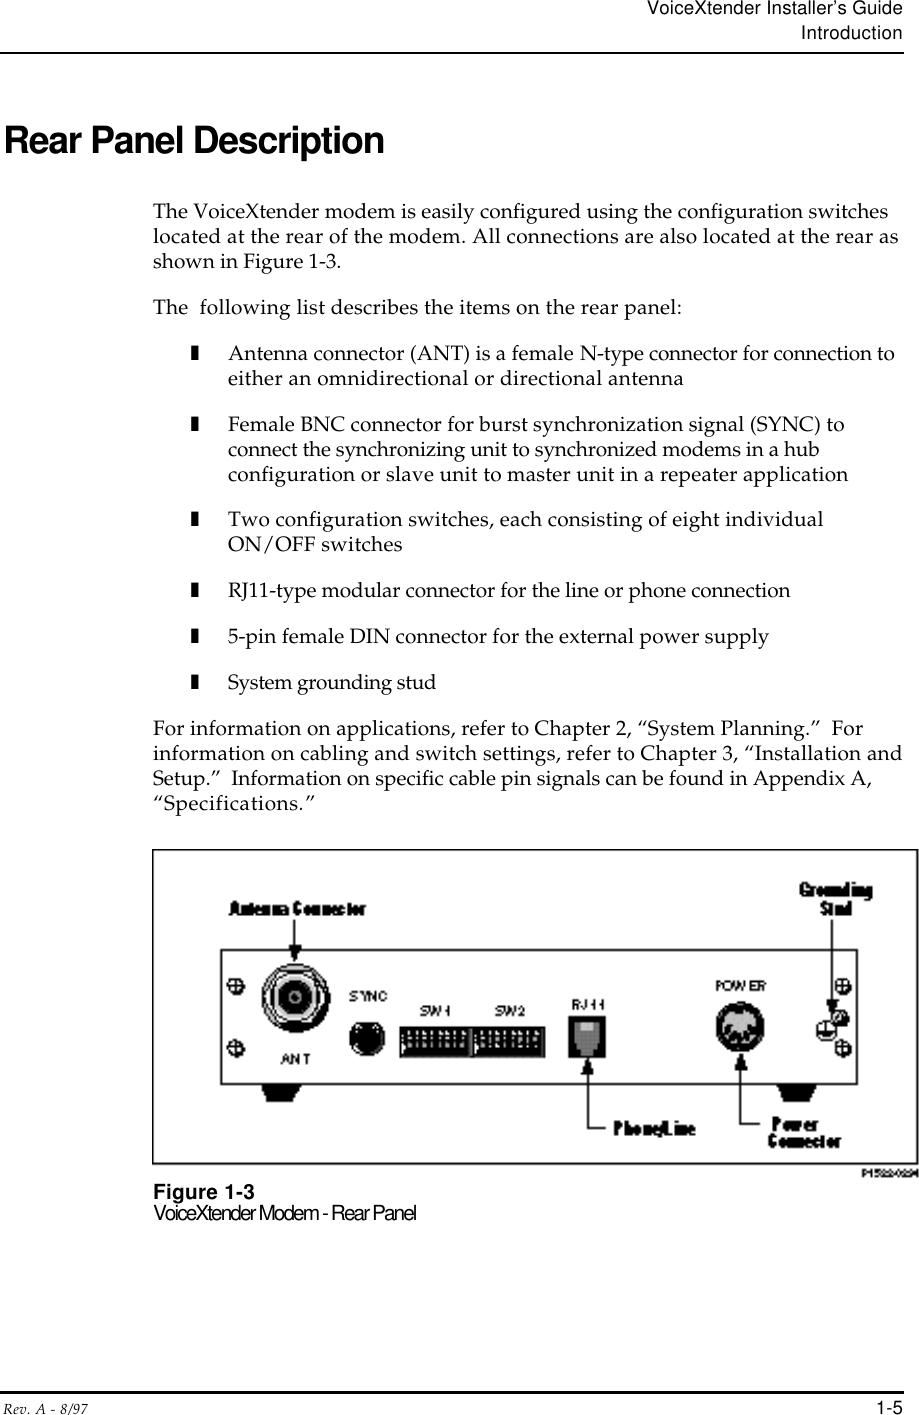 VoiceXtender Installer’s GuideIntroductionRev. A - 8/97 1-5Rear Panel DescriptionThe VoiceXtender modem is easily configured using the configuration switcheslocated at the rear of the modem. All connections are also located at the rear asshown in Figure 1-3.The  following list describes the items on the rear panel:❚Antenna connector (ANT) is a female N-type connector for connection toeither an omnidirectional or directional antenna❚Female BNC connector for burst synchronization signal (SYNC) toconnect the synchronizing unit to synchronized modems in a hubconfiguration or slave unit to master unit in a repeater application❚Two configuration switches, each consisting of eight individualON/OFF switches❚RJ11-type modular connector for the line or phone connection❚5-pin female DIN connector for the external power supply❚System grounding studFor information on applications, refer to Chapter 2, “System Planning.”  Forinformation on cabling and switch settings, refer to Chapter 3, “Installation andSetup.”  Information on specific cable pin signals can be found in Appendix A,“Specifications.”Figure 1-3VoiceXtender Modem - Rear Panel